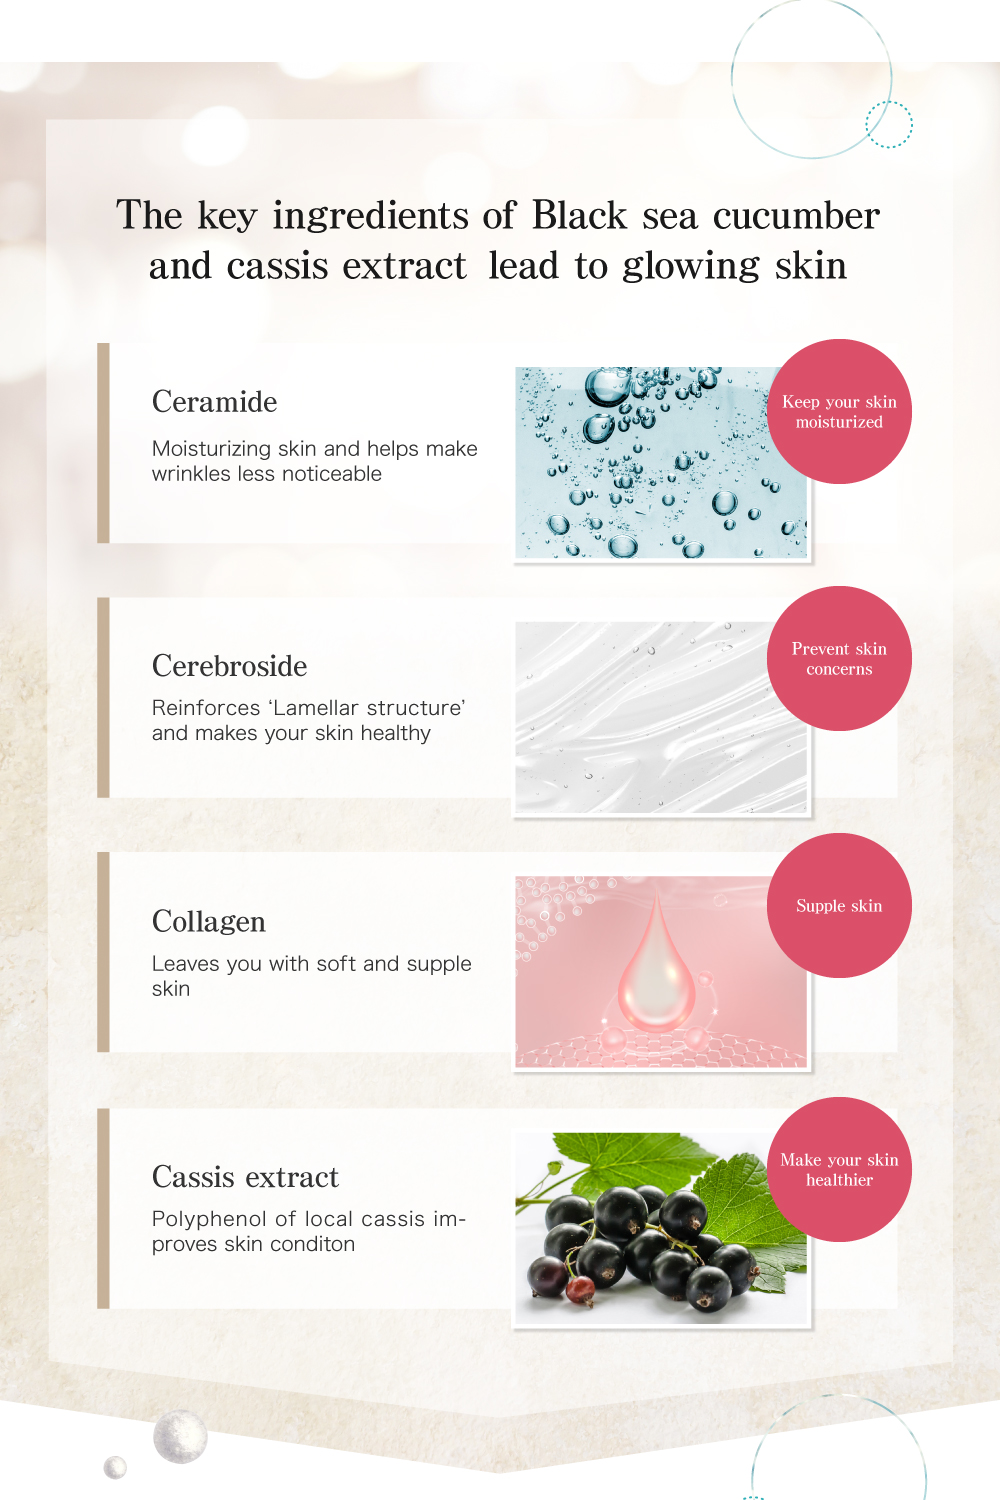 The key ingredients of Black sea cucumber and cassis extract lead to glowing skin